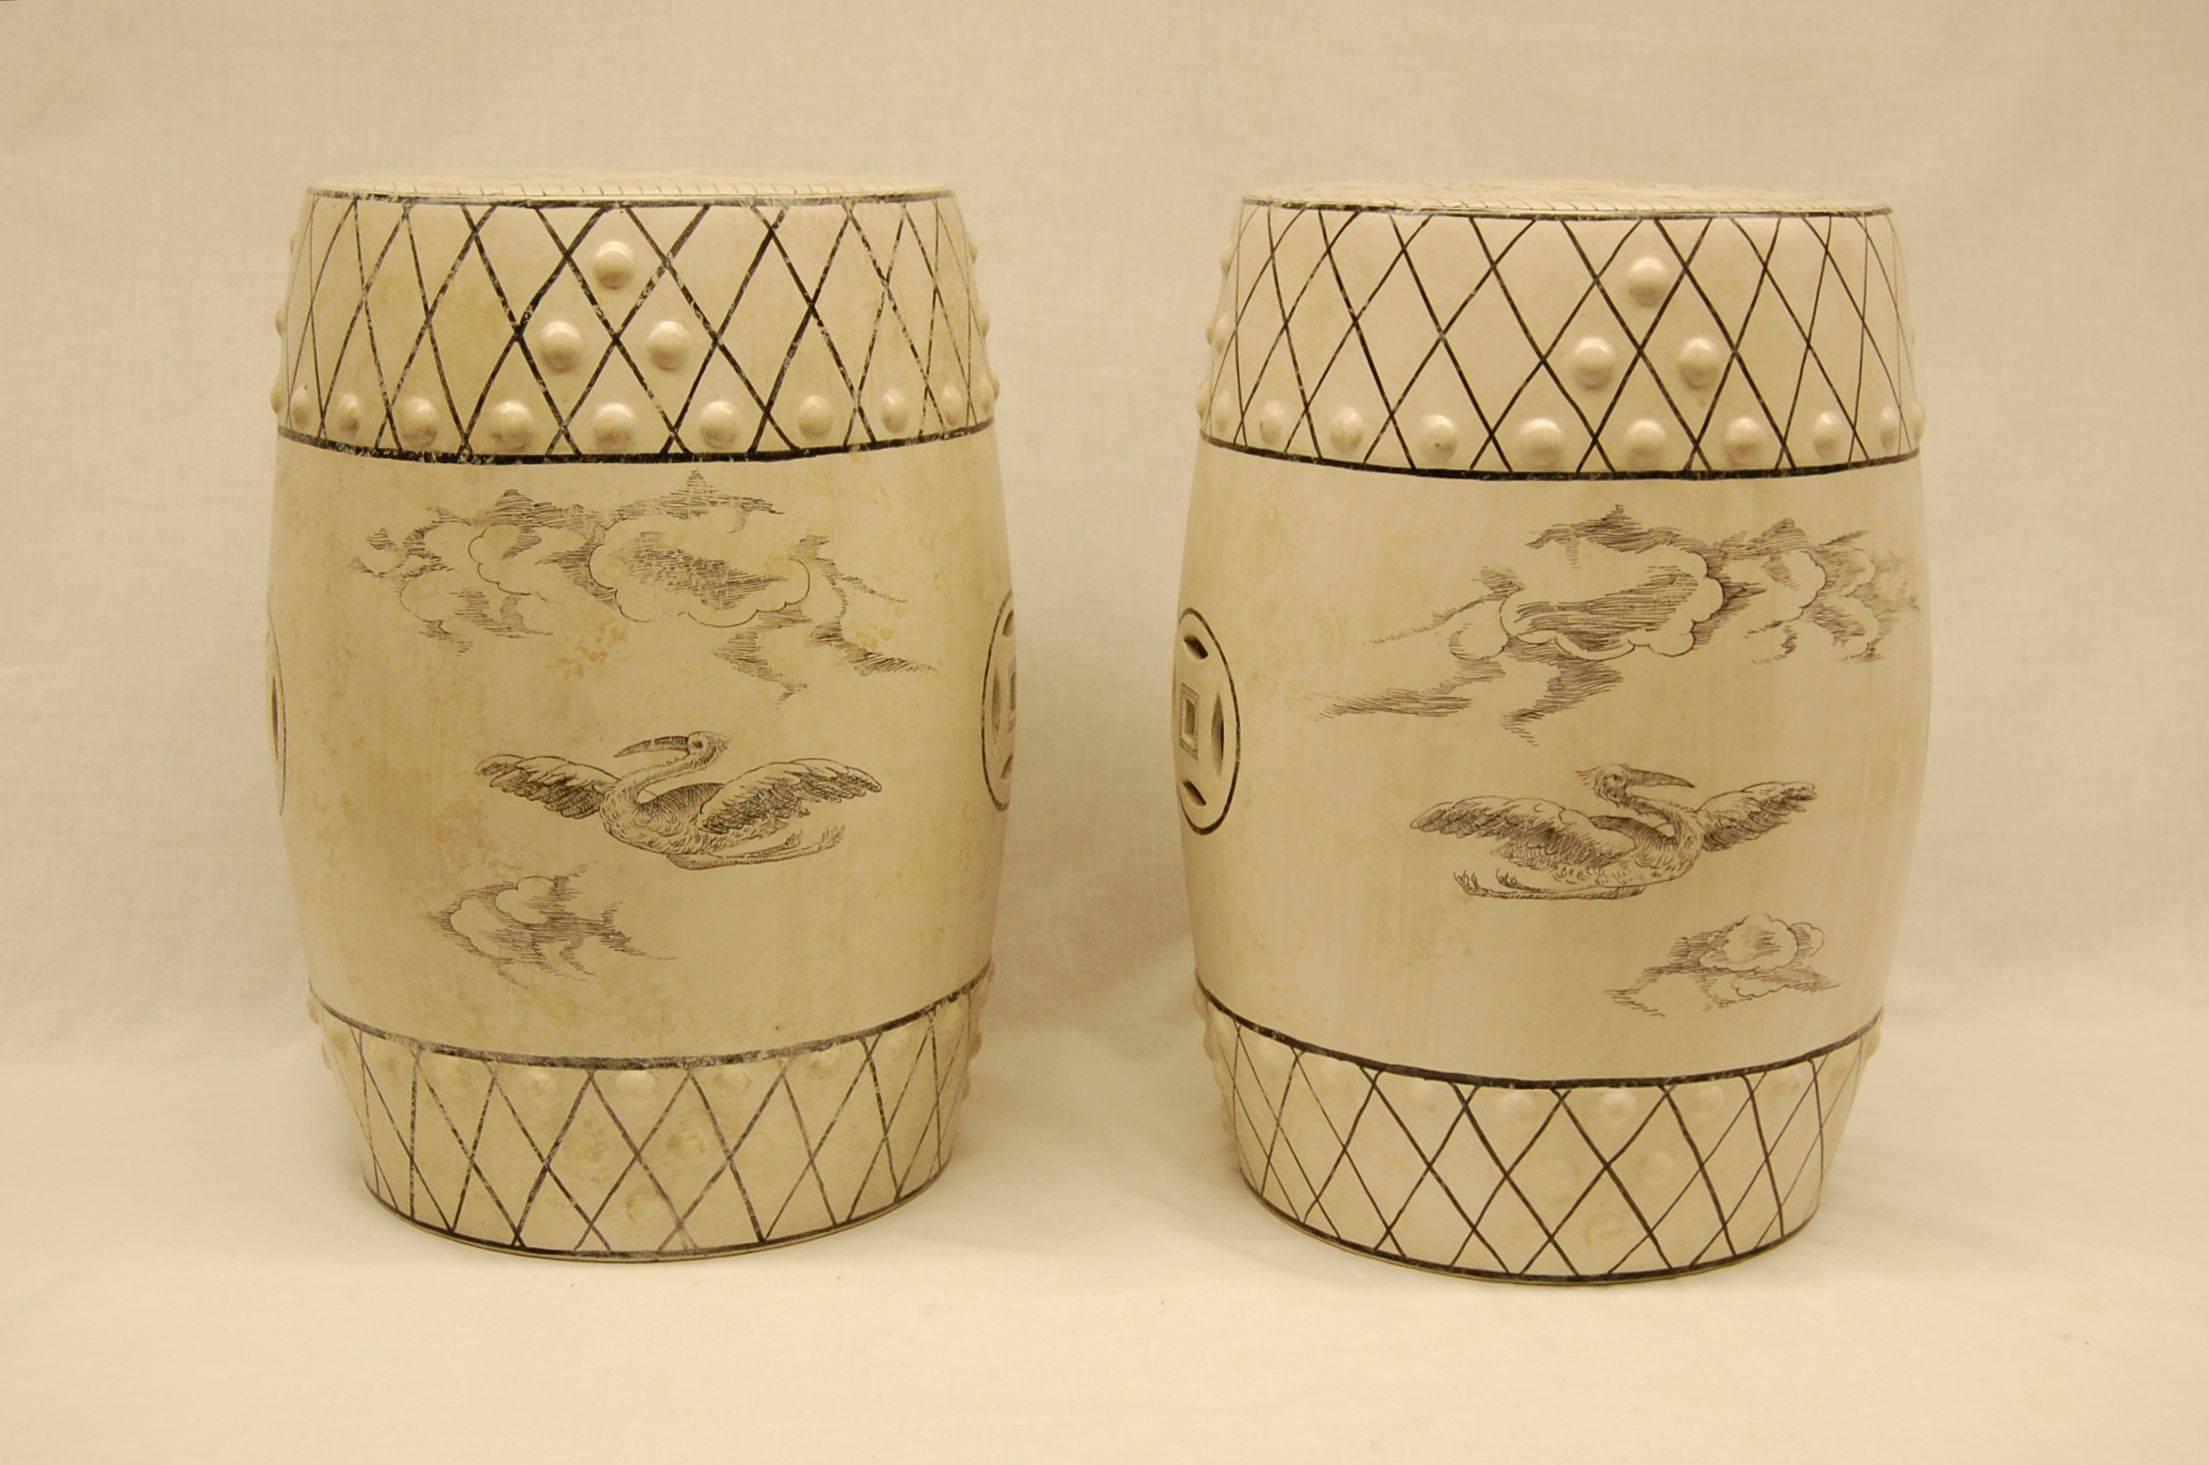 White glazed porcelain seats with scenes of hunting dogs attacking a boar, as well as birds flying. Excellent condition, age and origin unknown but likely, early 20th century.